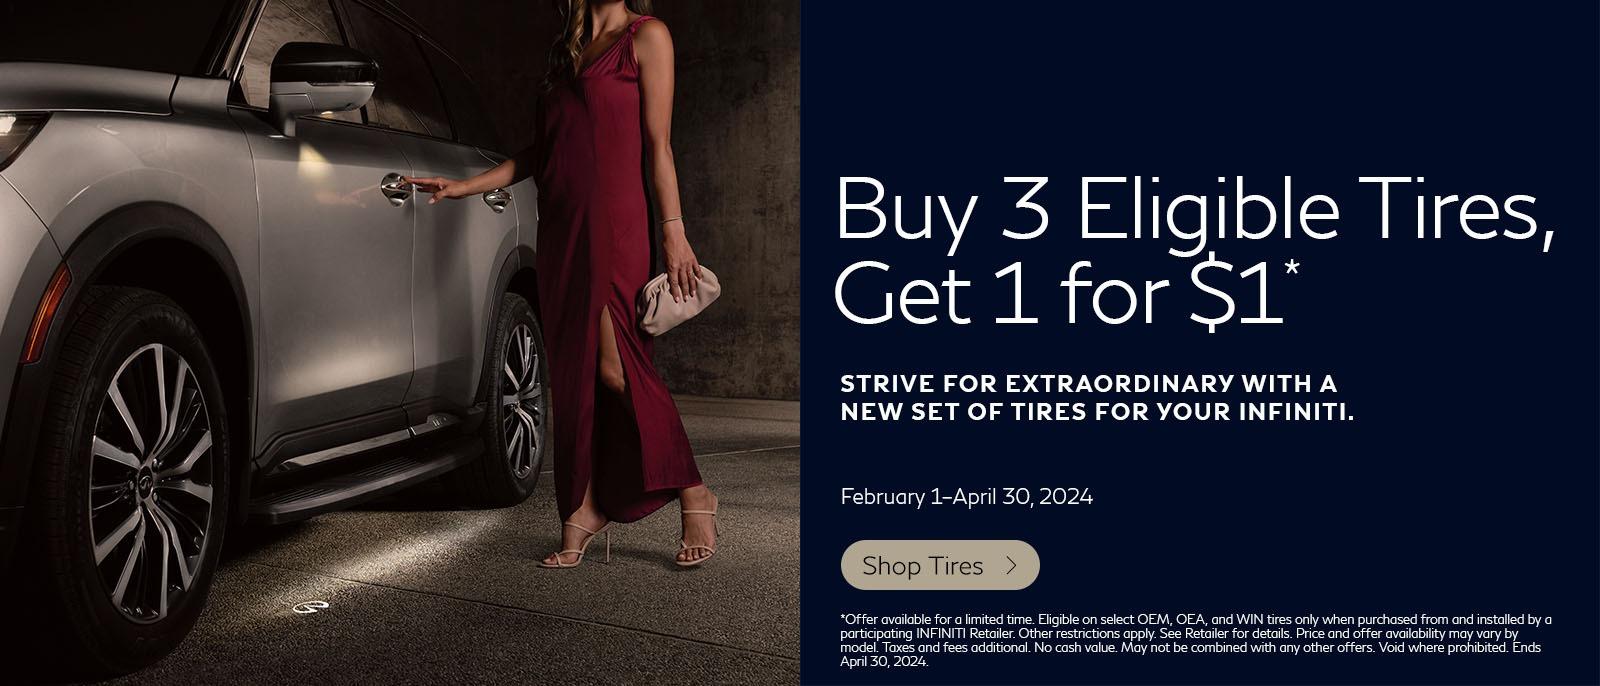 Buy 3 eligible Tires, Get 1 For $1